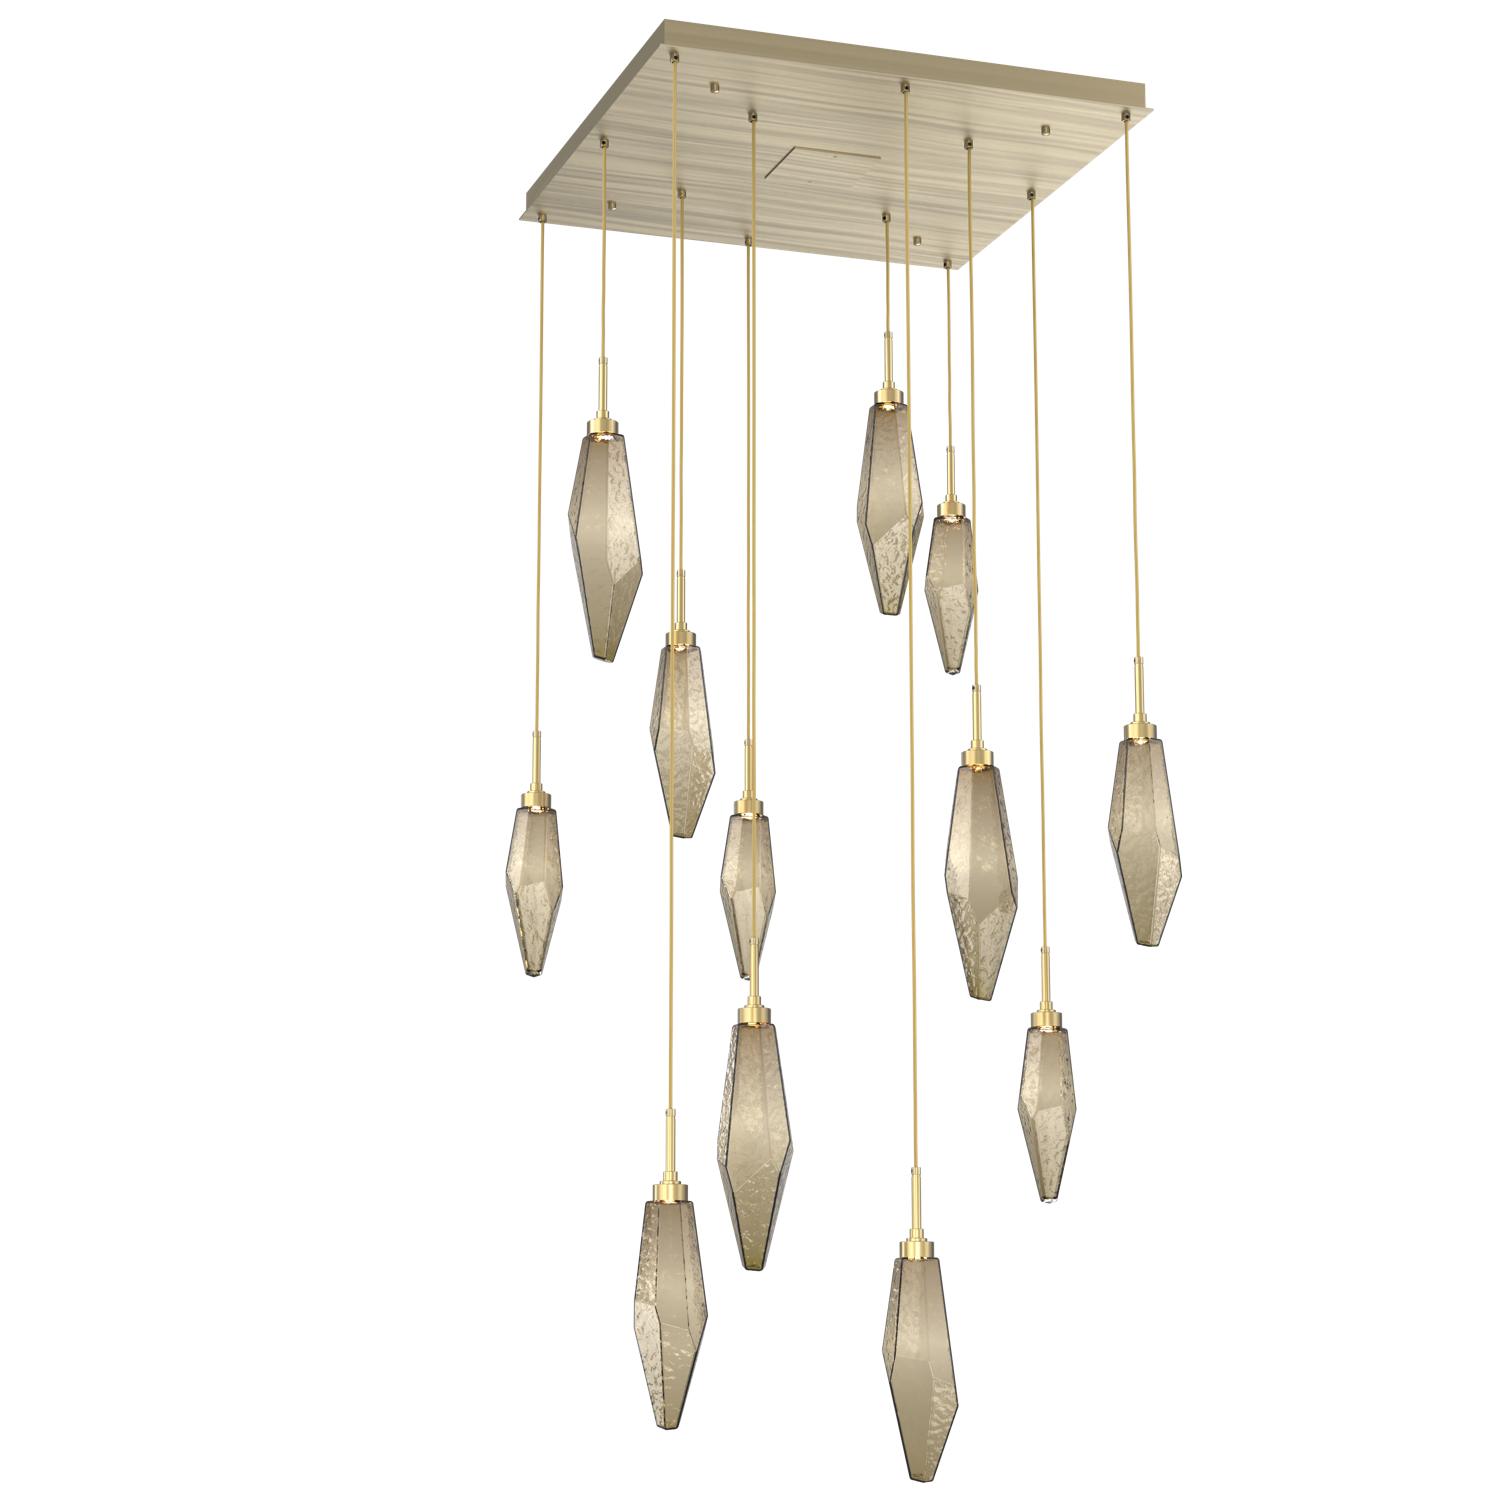 CHB0050-12-HB-CB-Hammerton-Studio-Rock-Crystal-12-light-square-pendant-chandelier-with-heritage-brass-finish-and-chilled-bronze-blown-glass-shades-and-LED-lamping